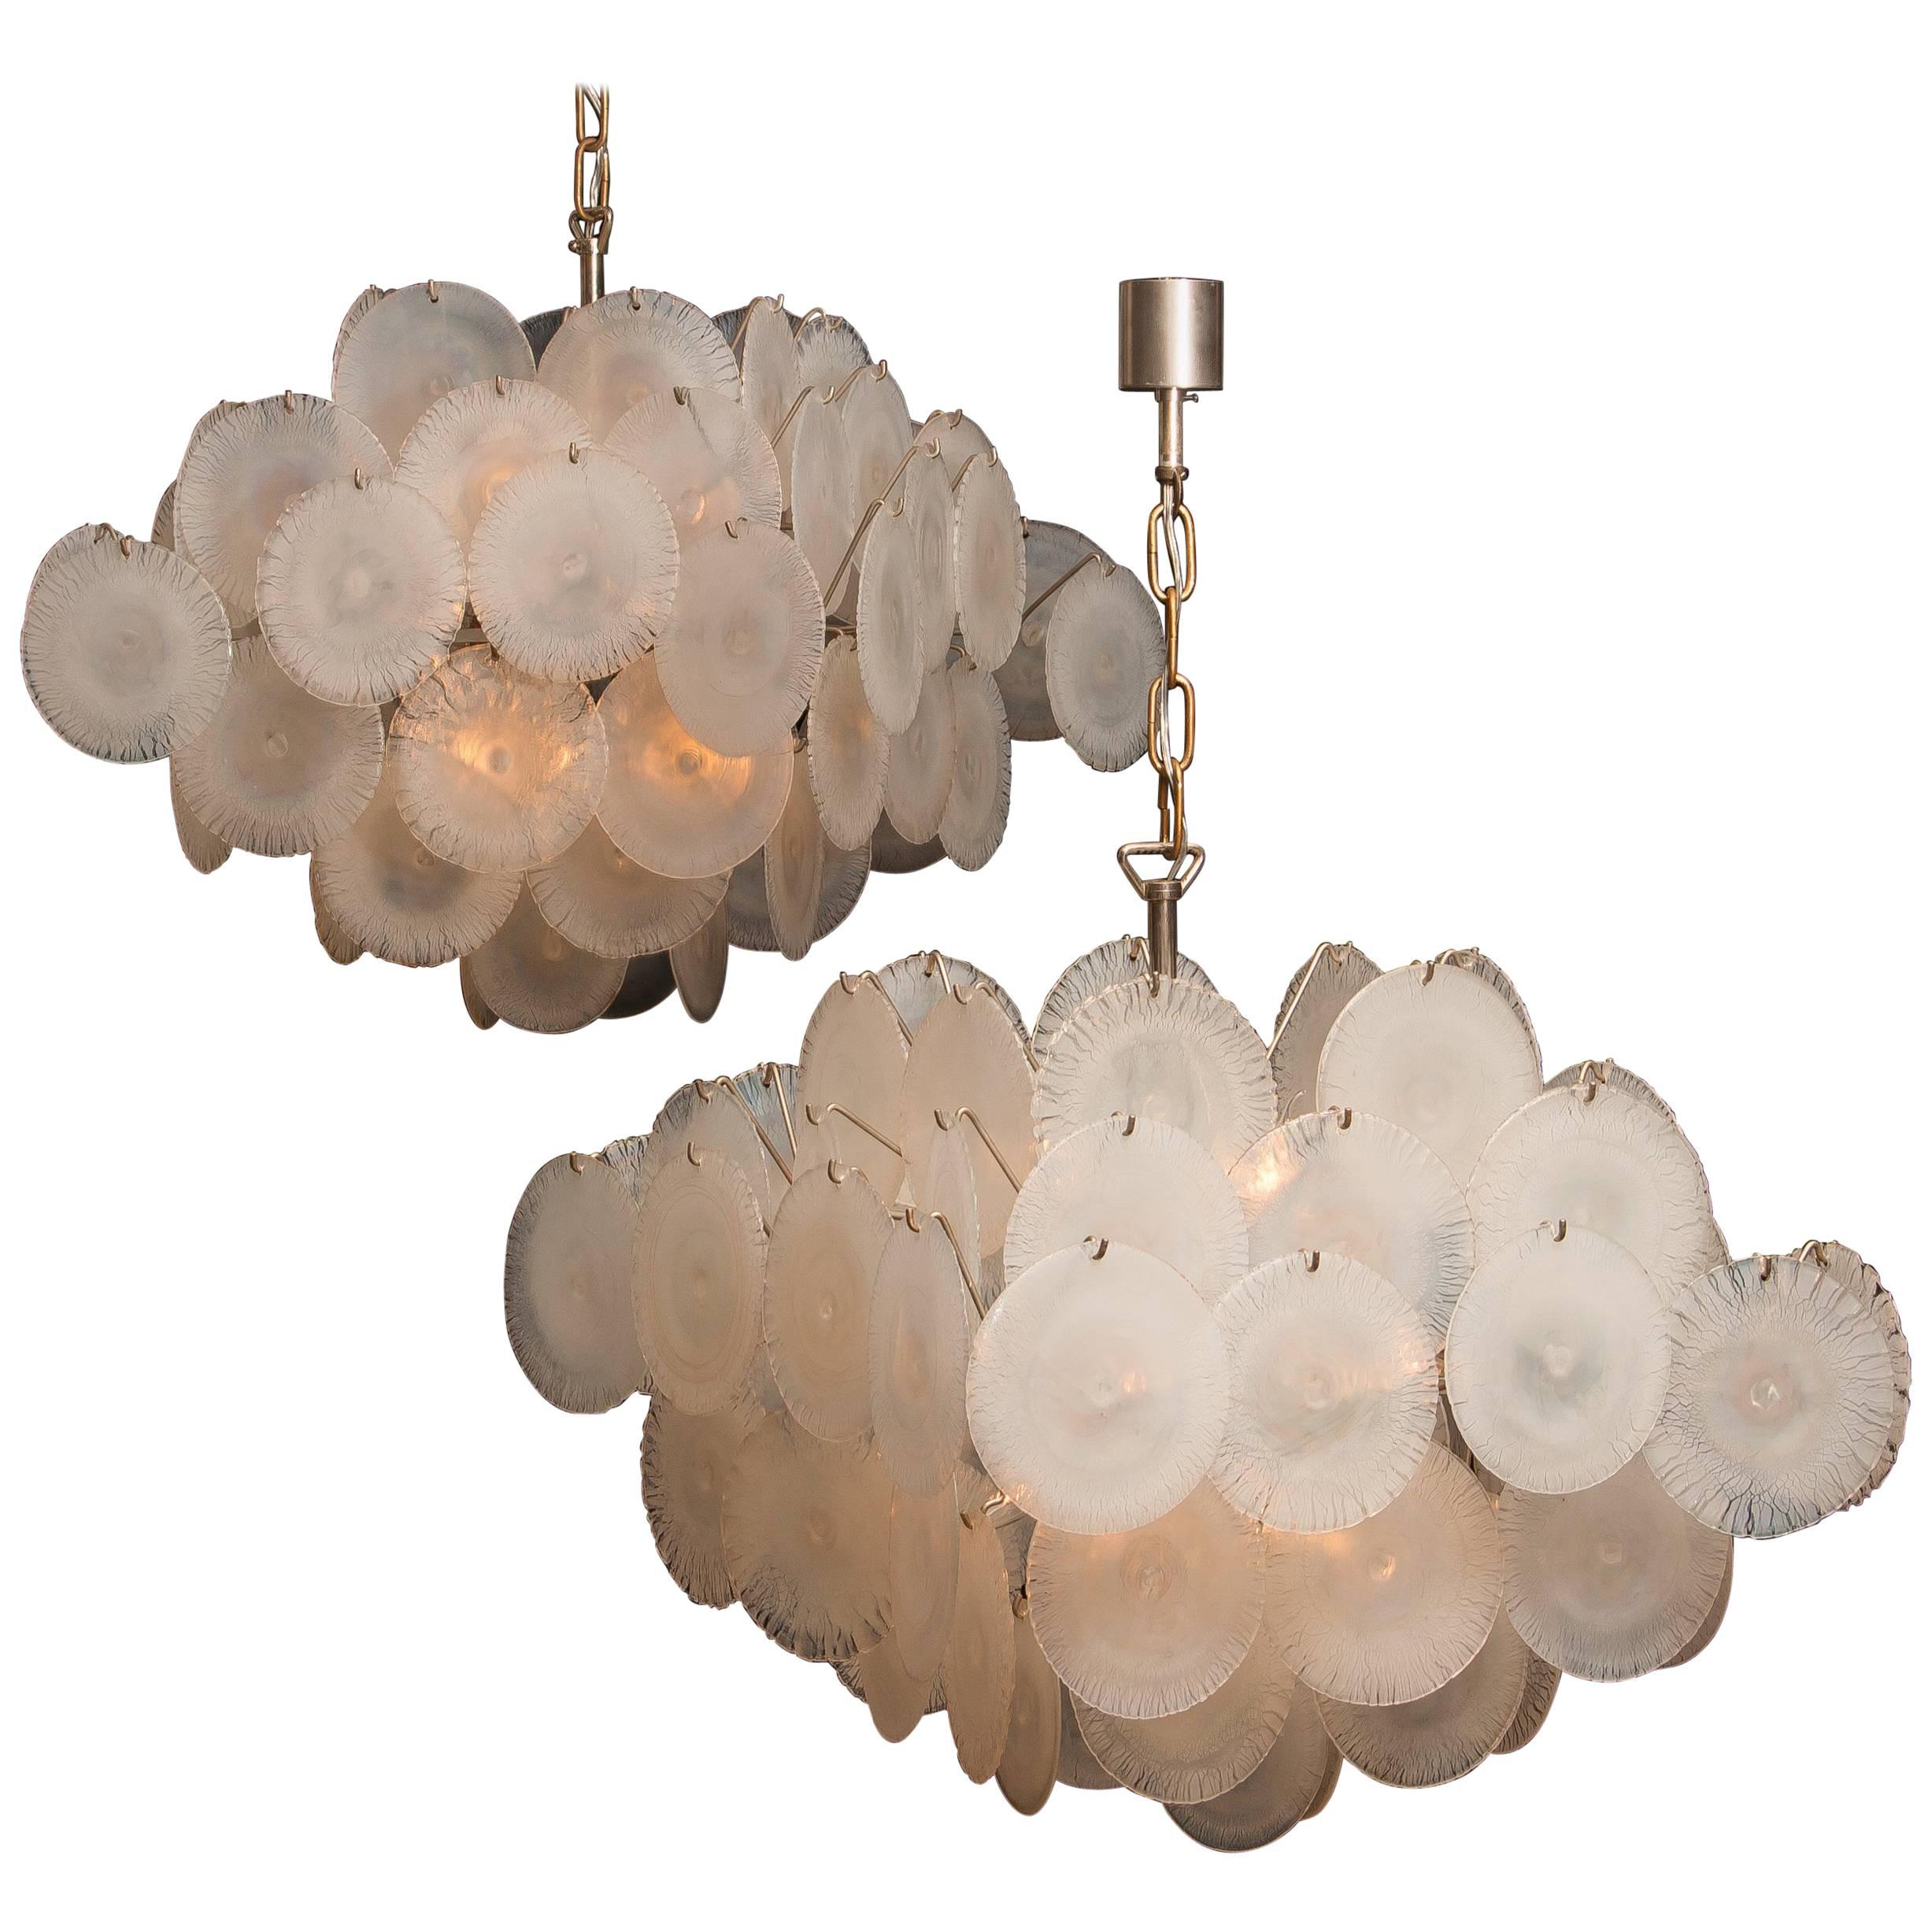 Set of Two Gino Vistosi Chandeliers with White / Pearl Murano Crystal Discs